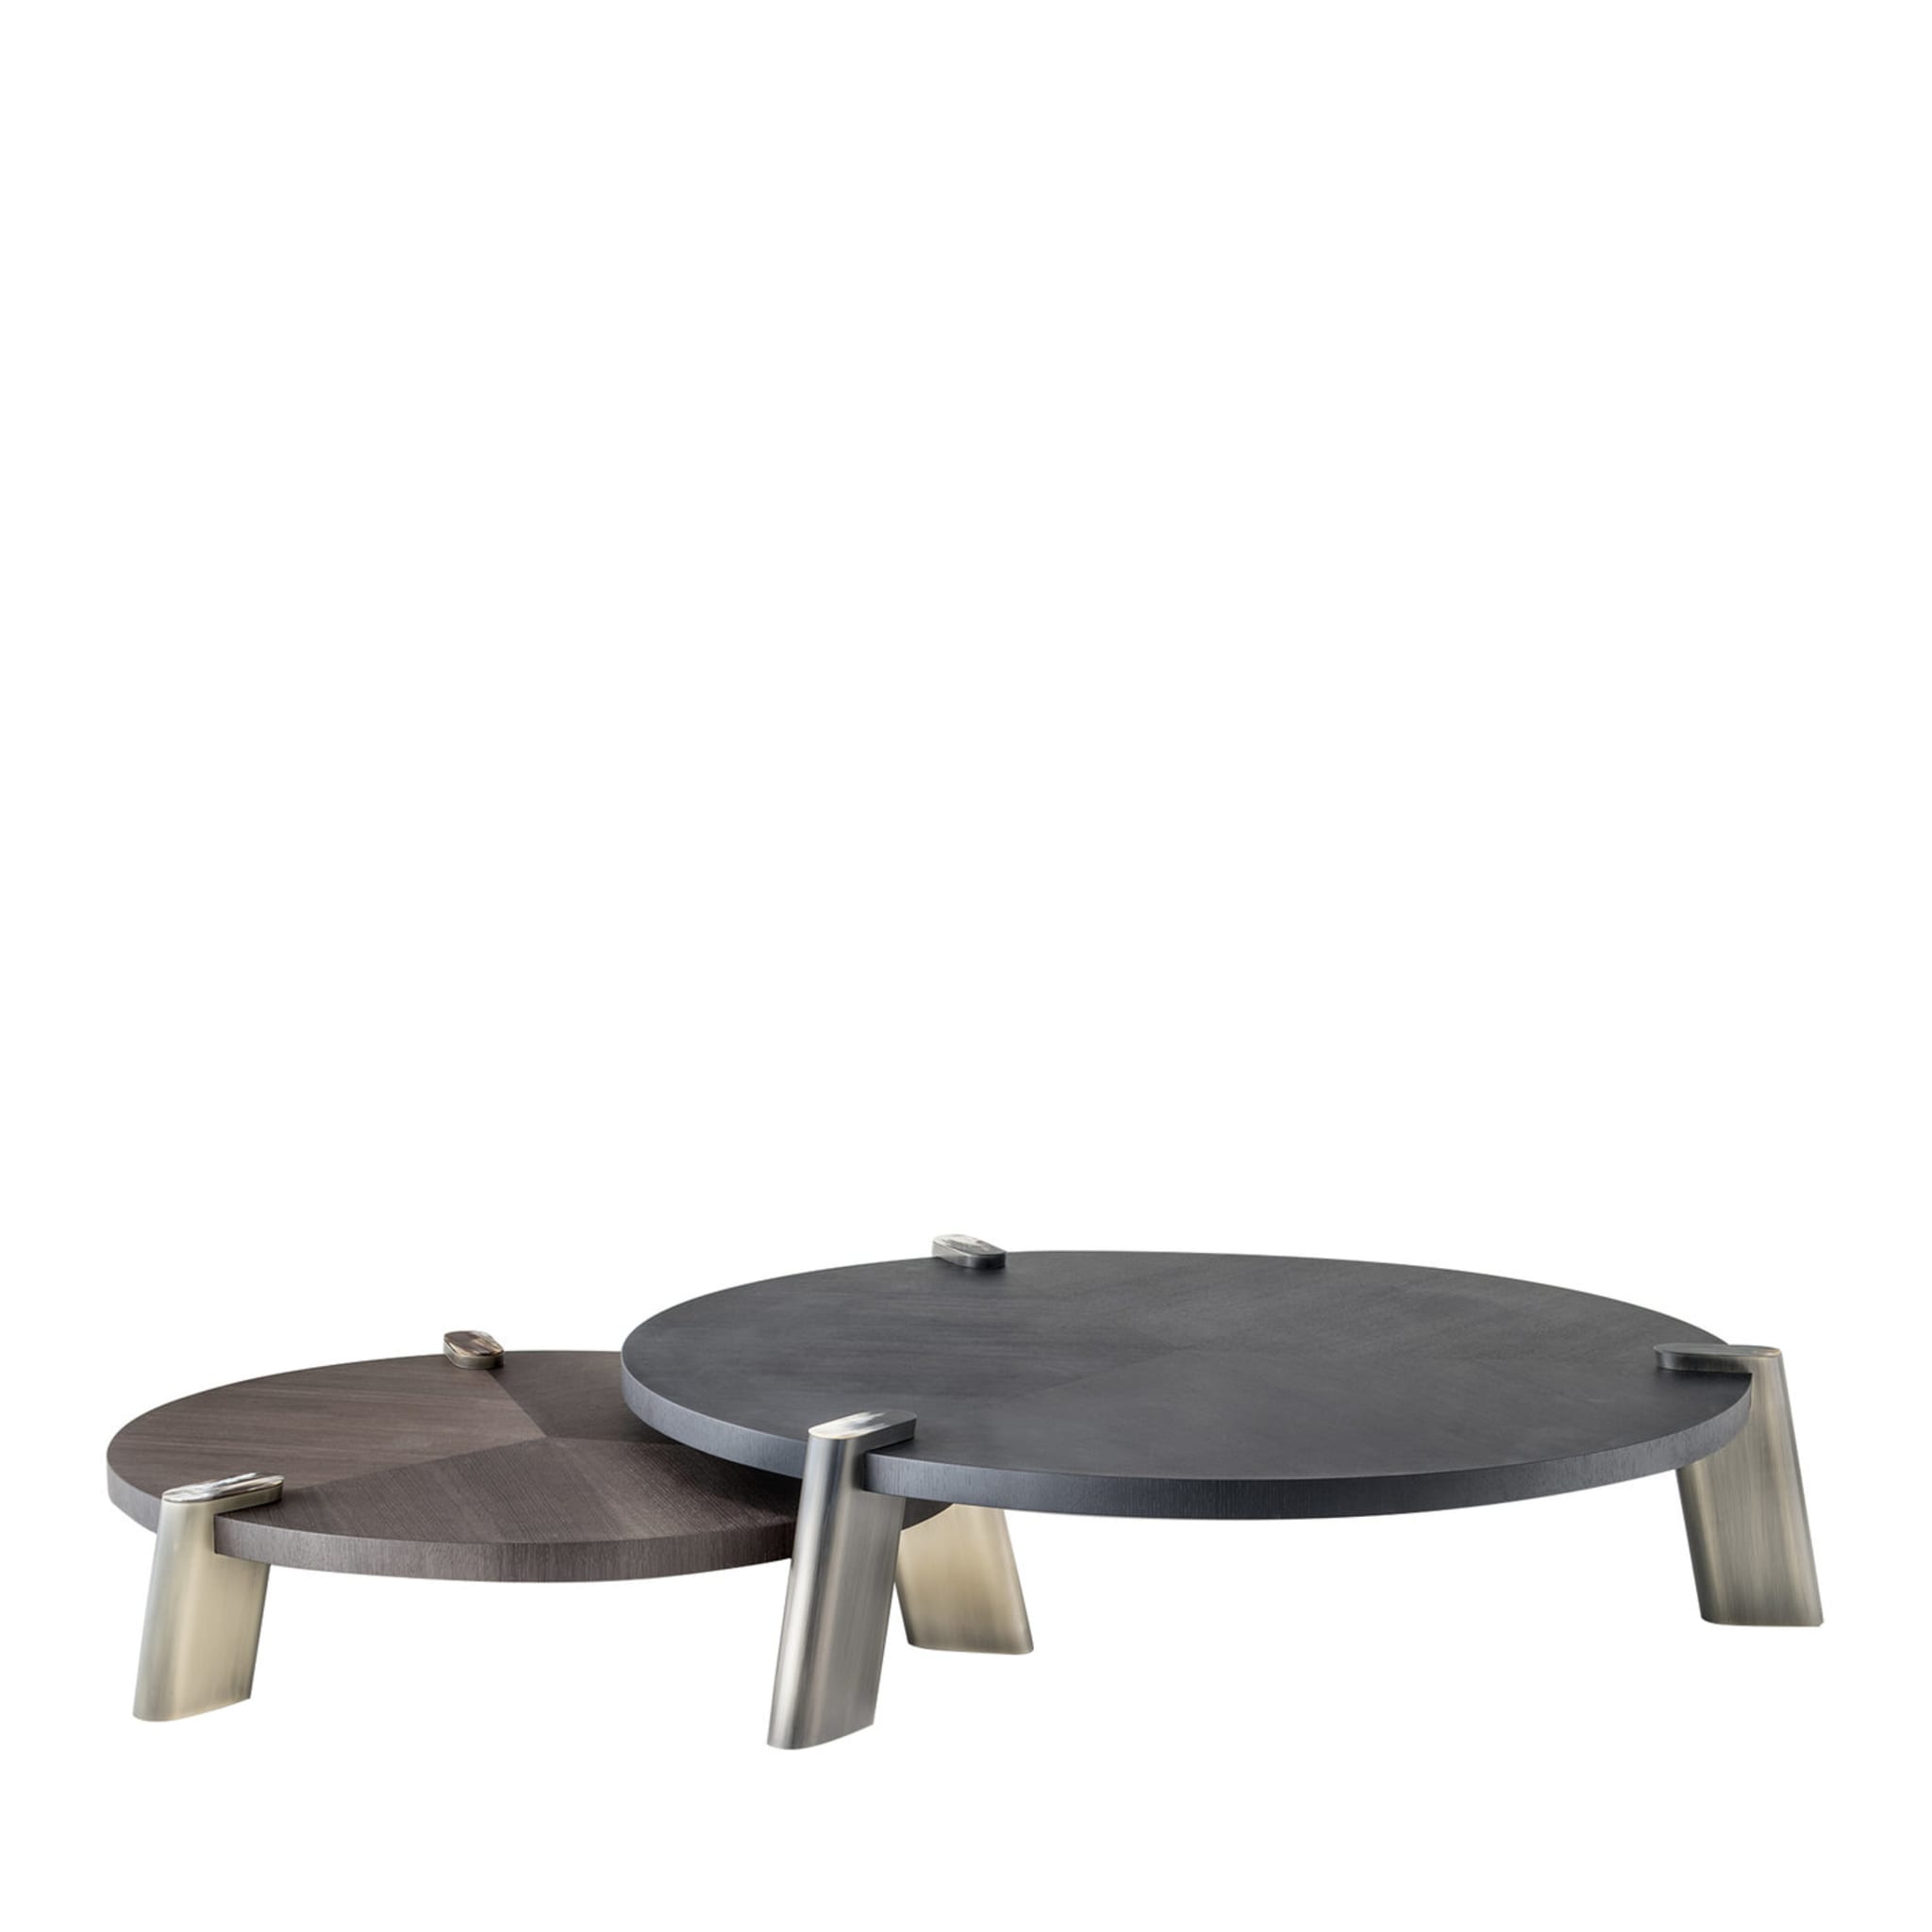 Set of 2 Coffee Nesting Tables - Main view